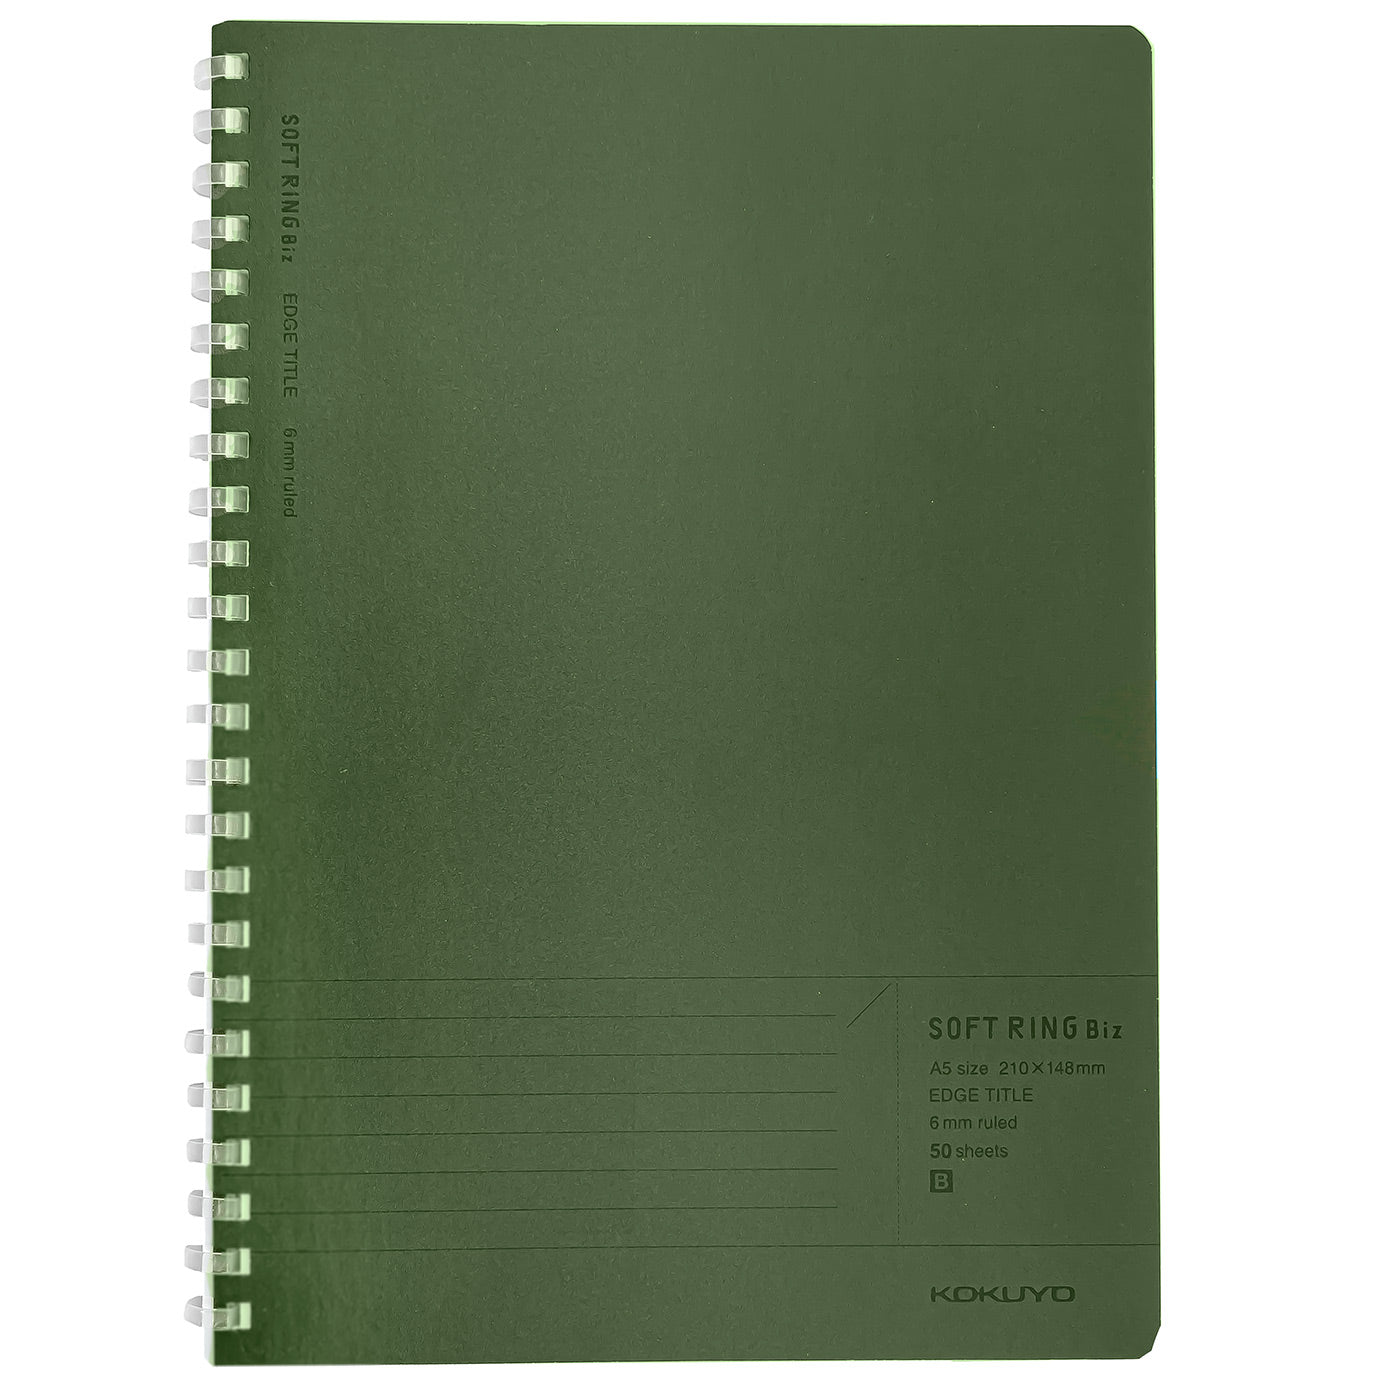 Titled Notebooks